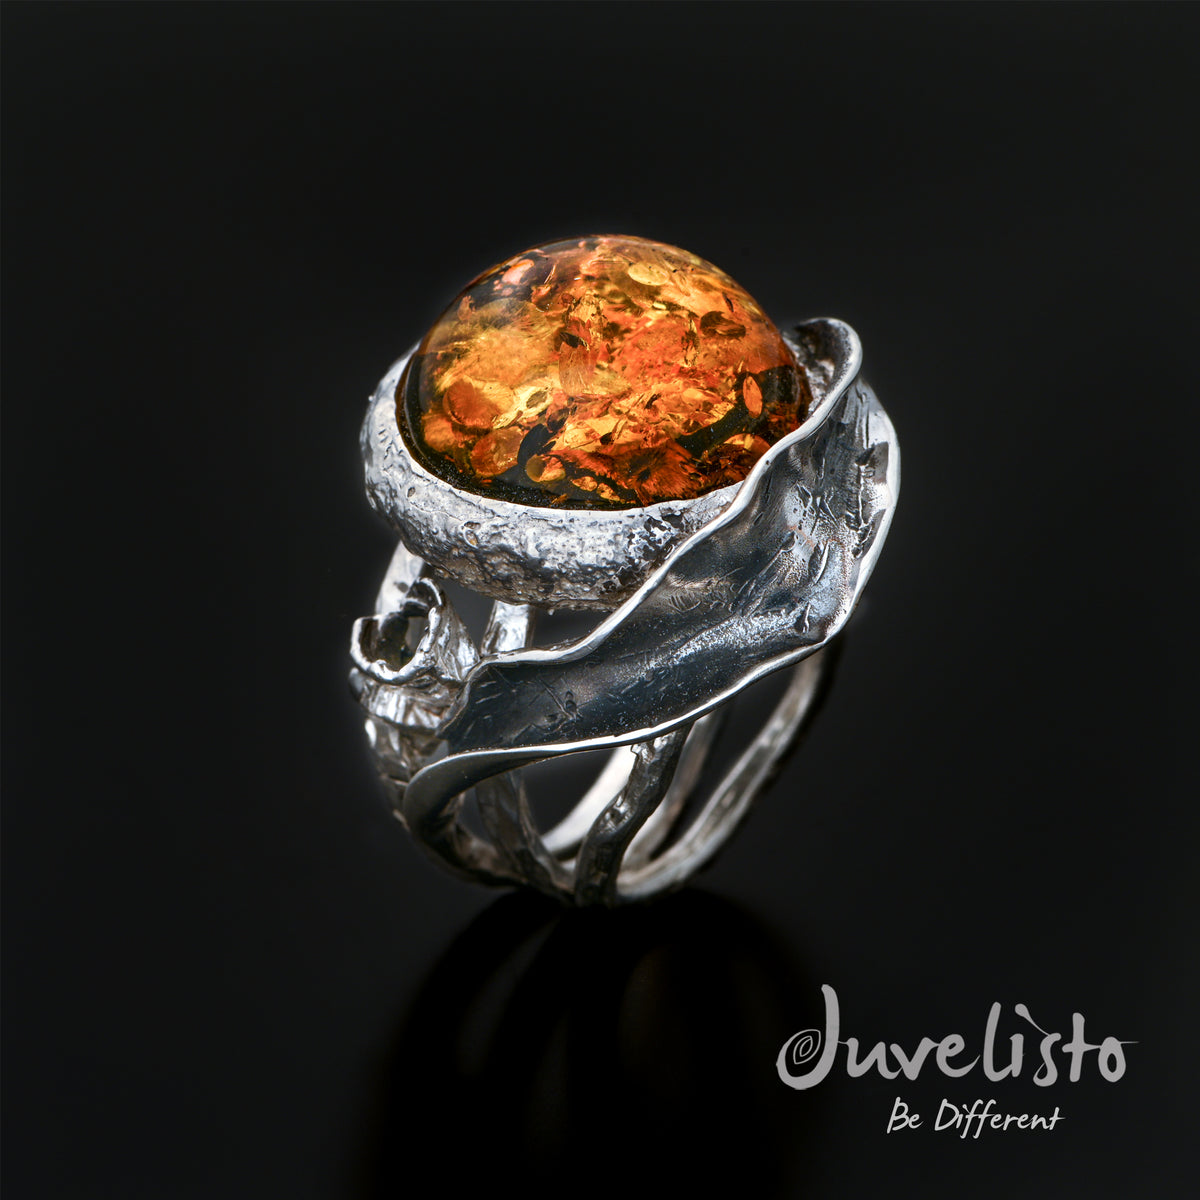 Juvelisto Design Baltic Amber Ring with Sterling Silver Acorn Leaf Setting